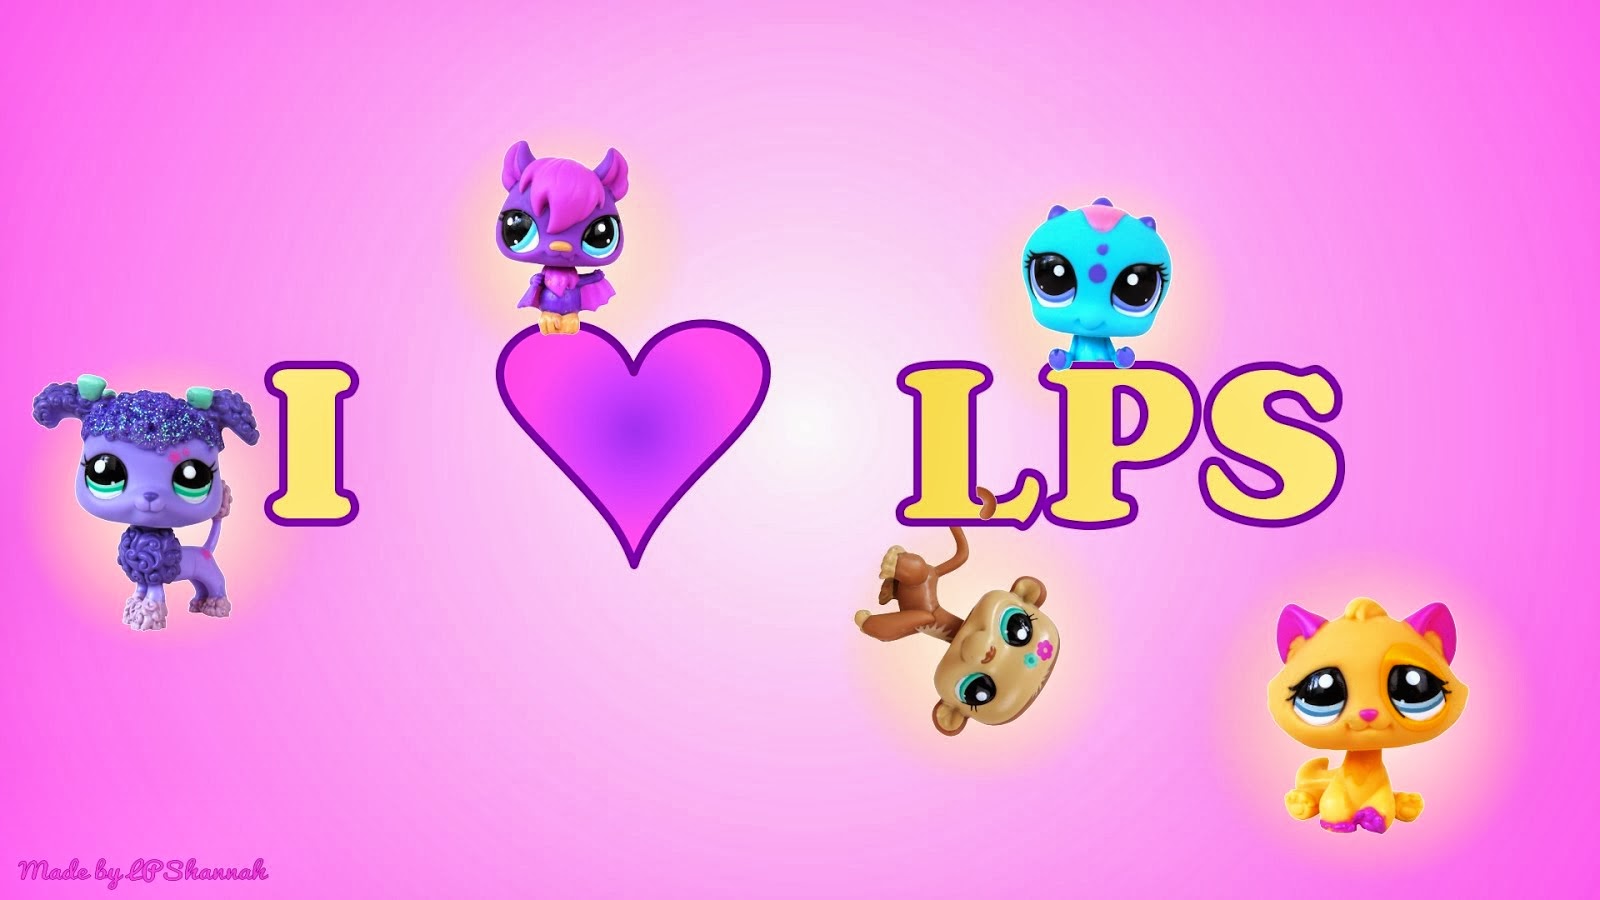 Lps